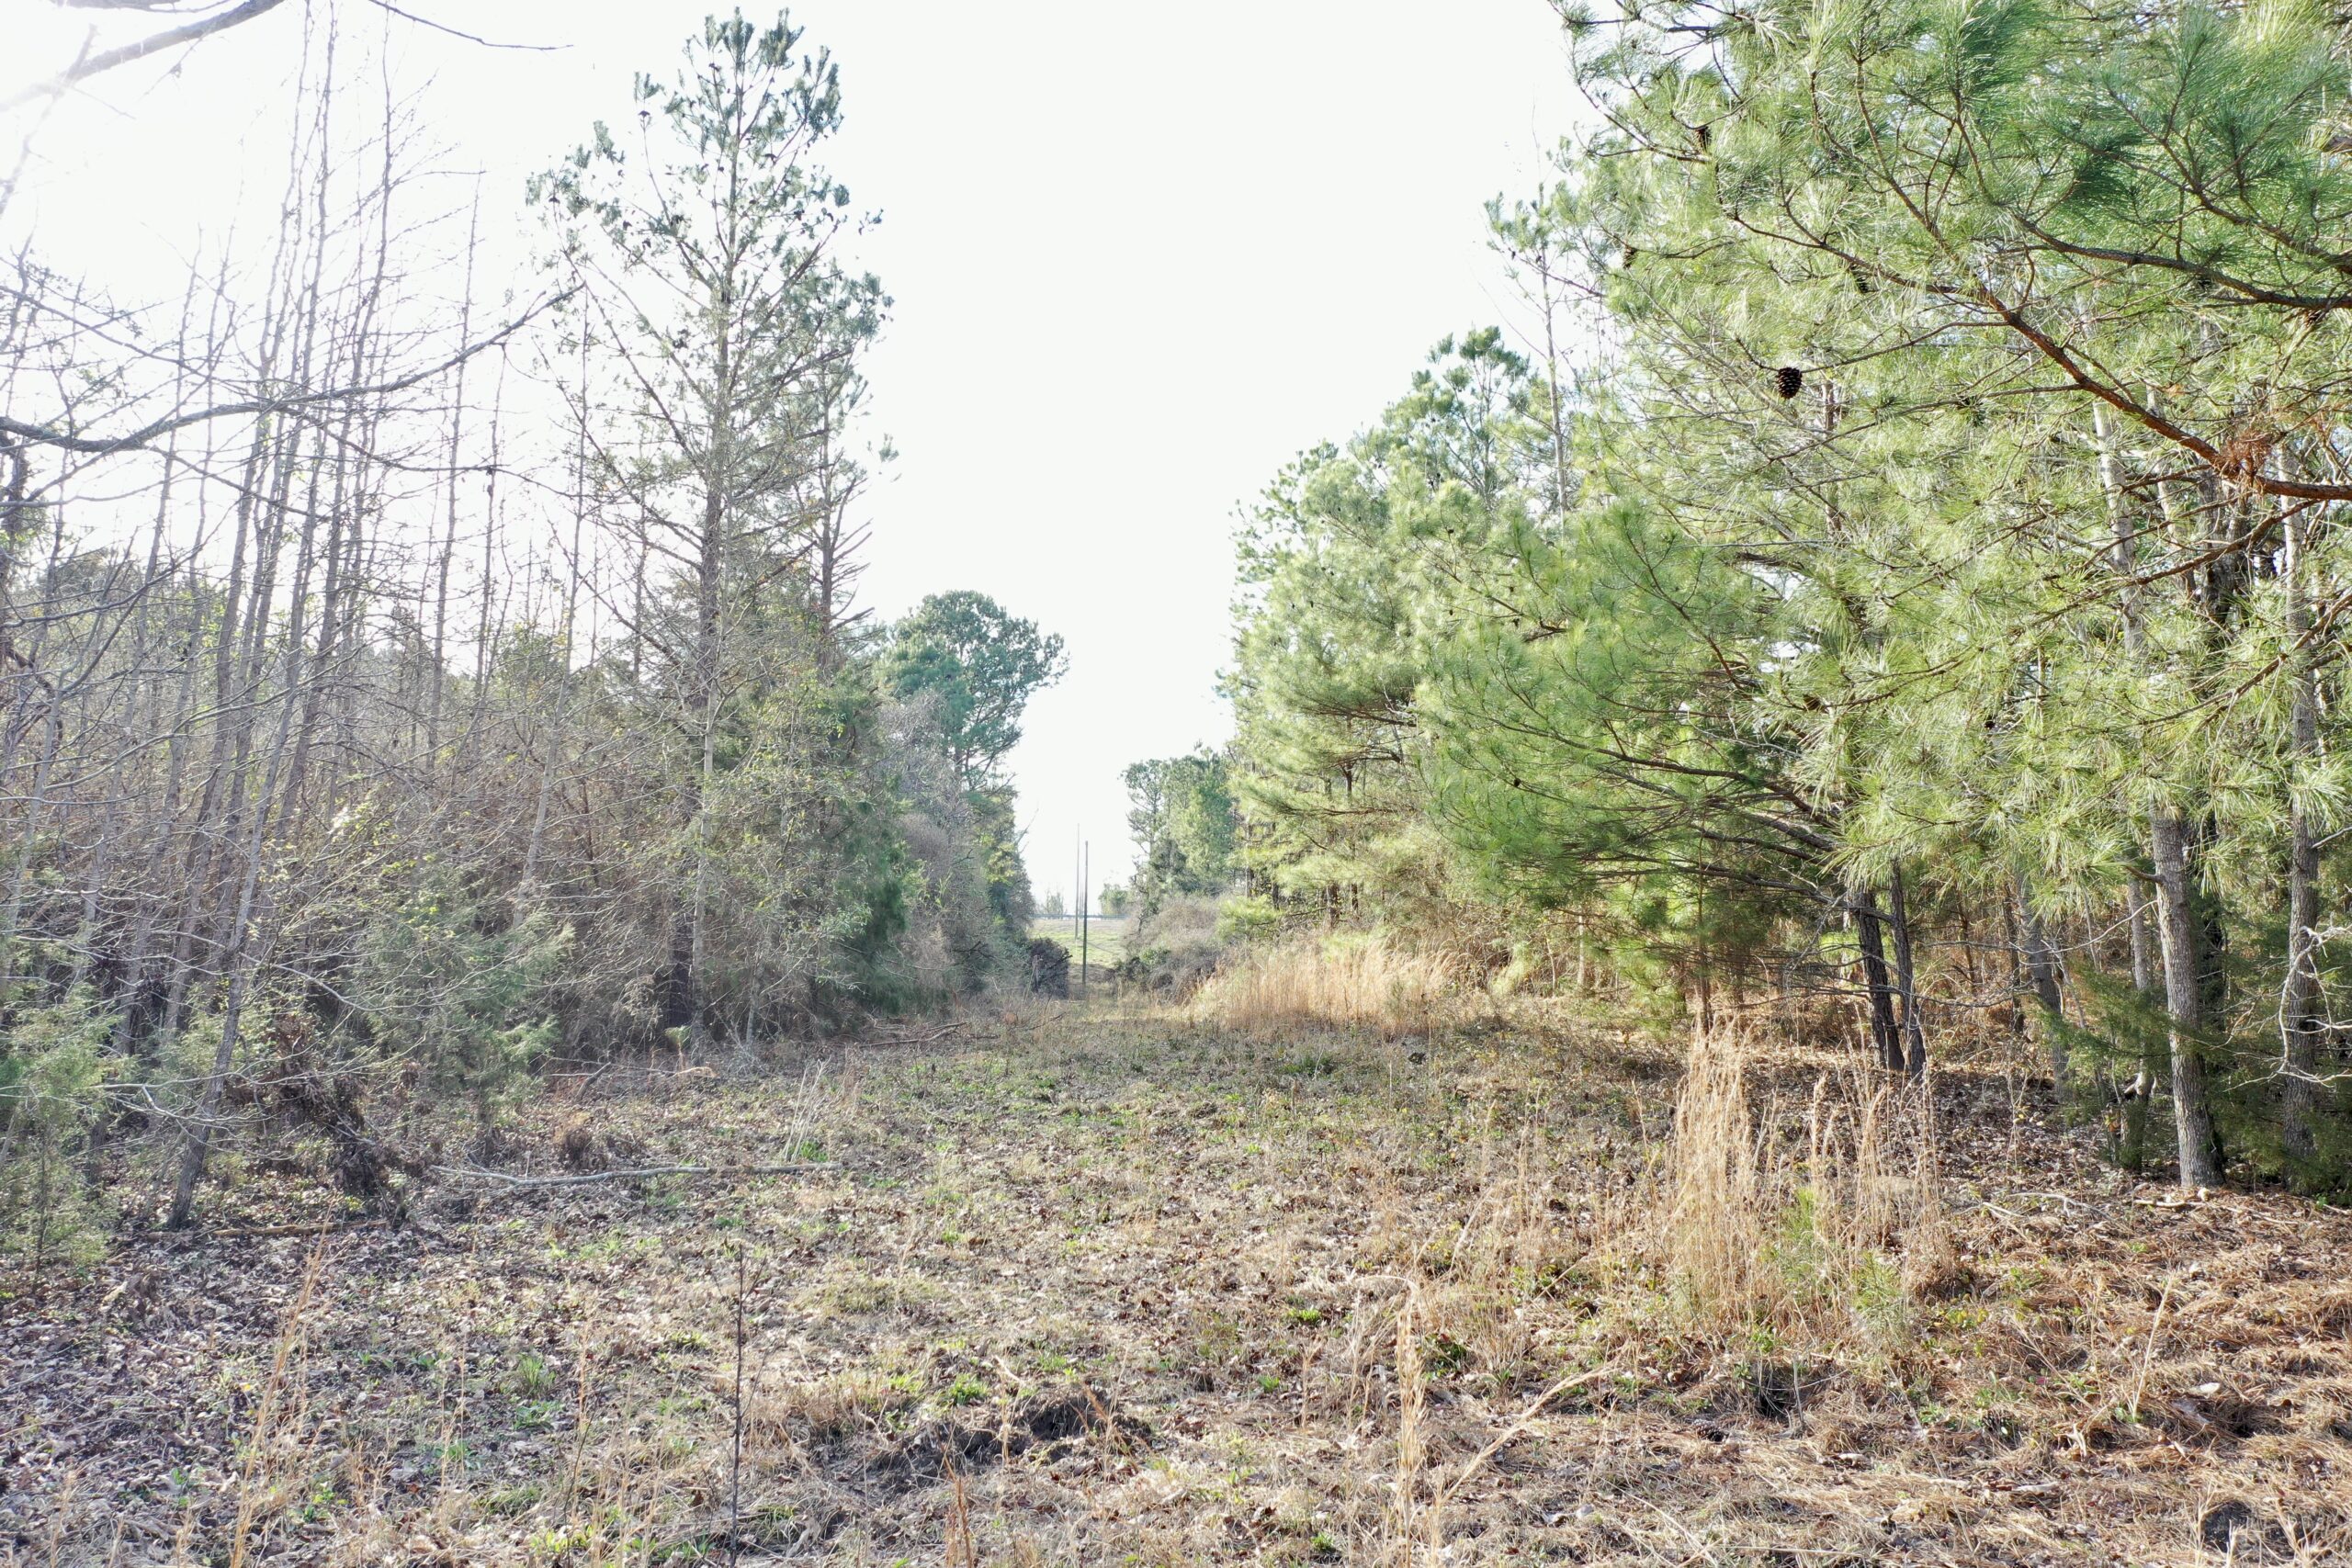 Taylor County Timber/Hunting Property